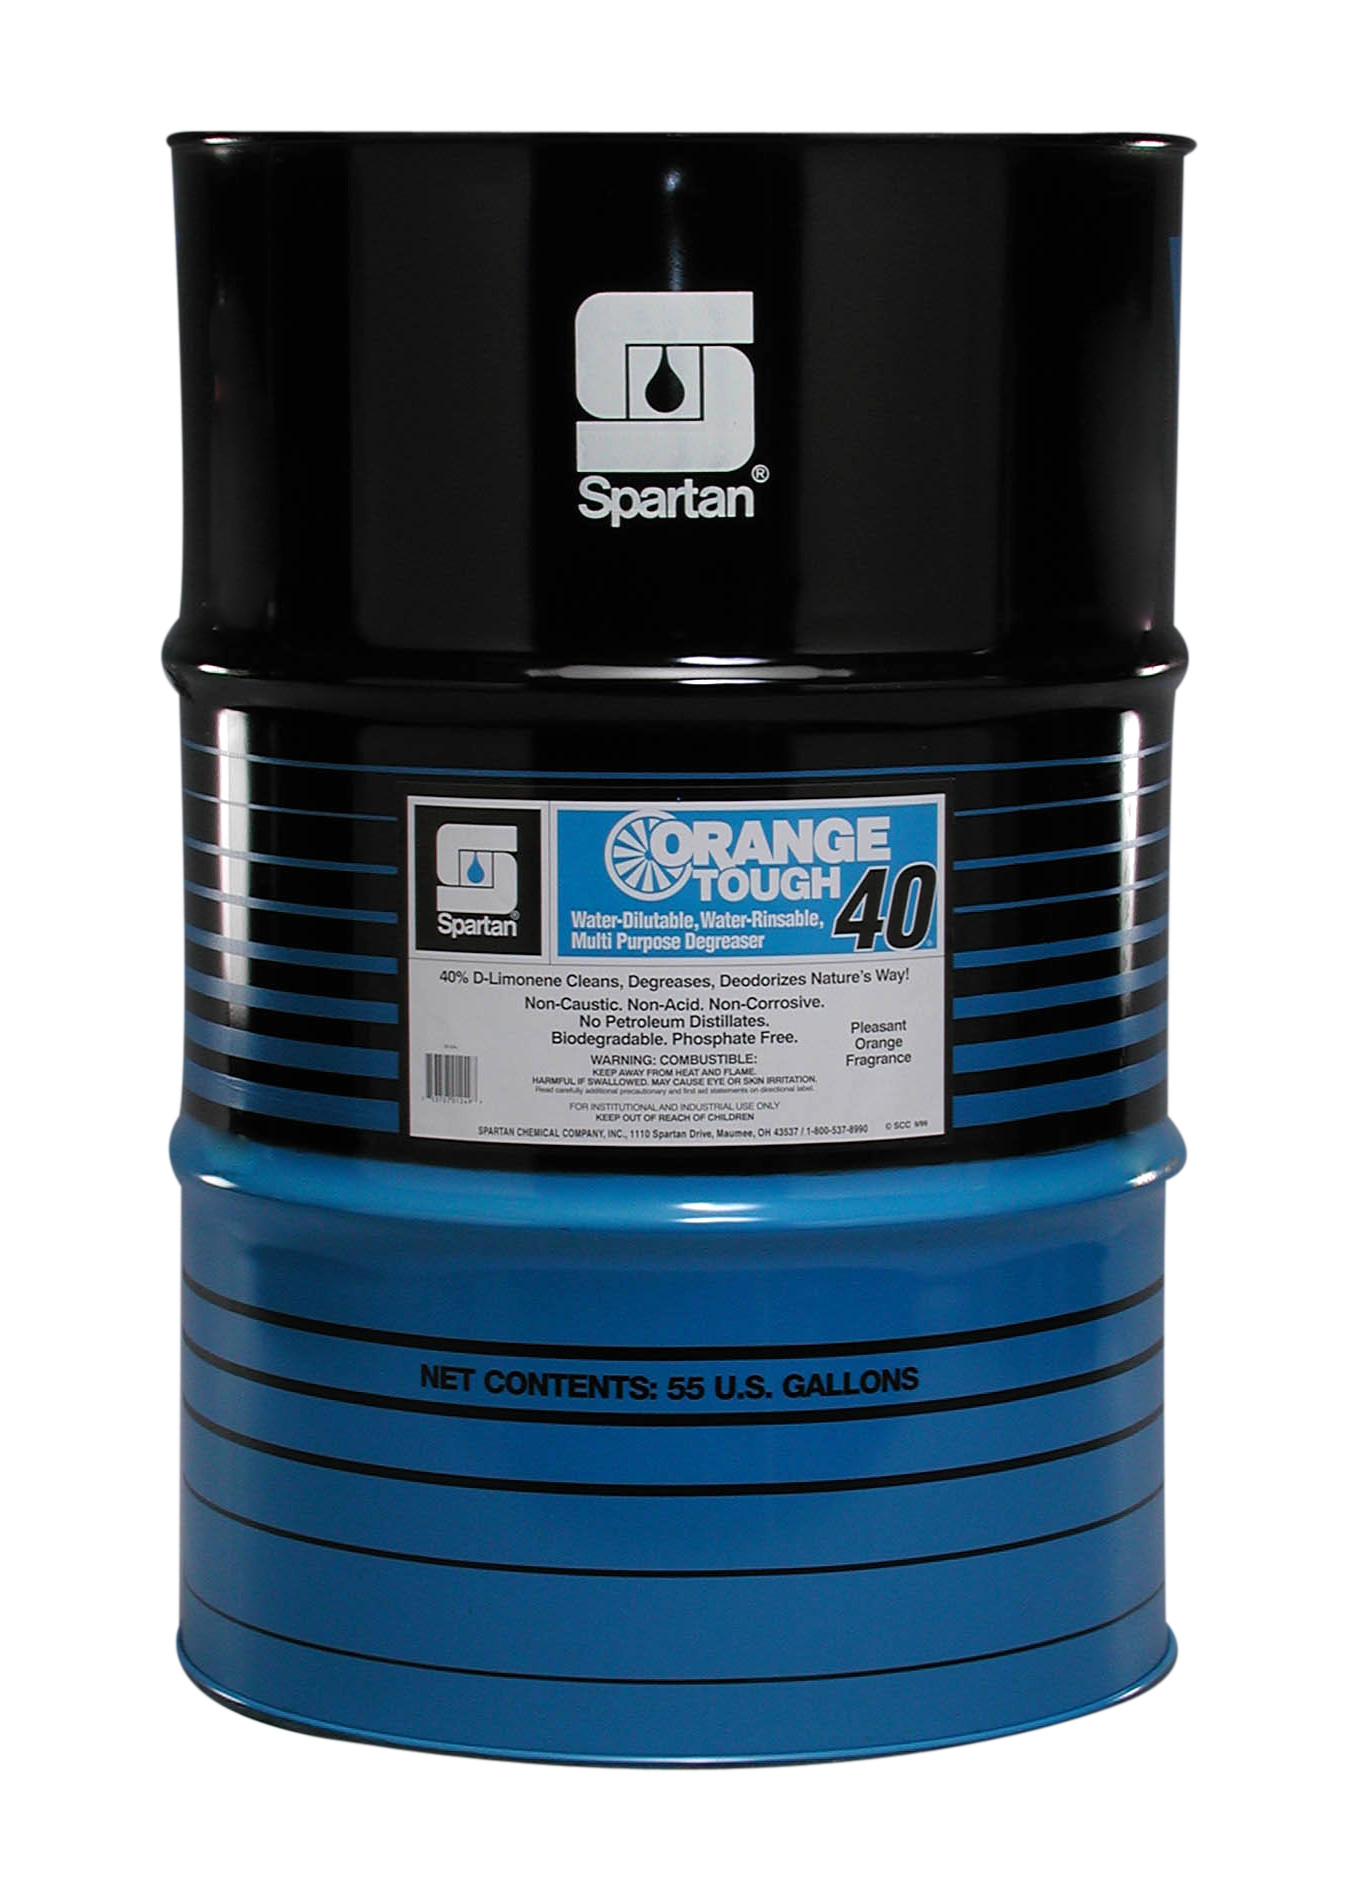 Spartan Chemical Company Orange Tough 40, 55 GAL STEEL LINED